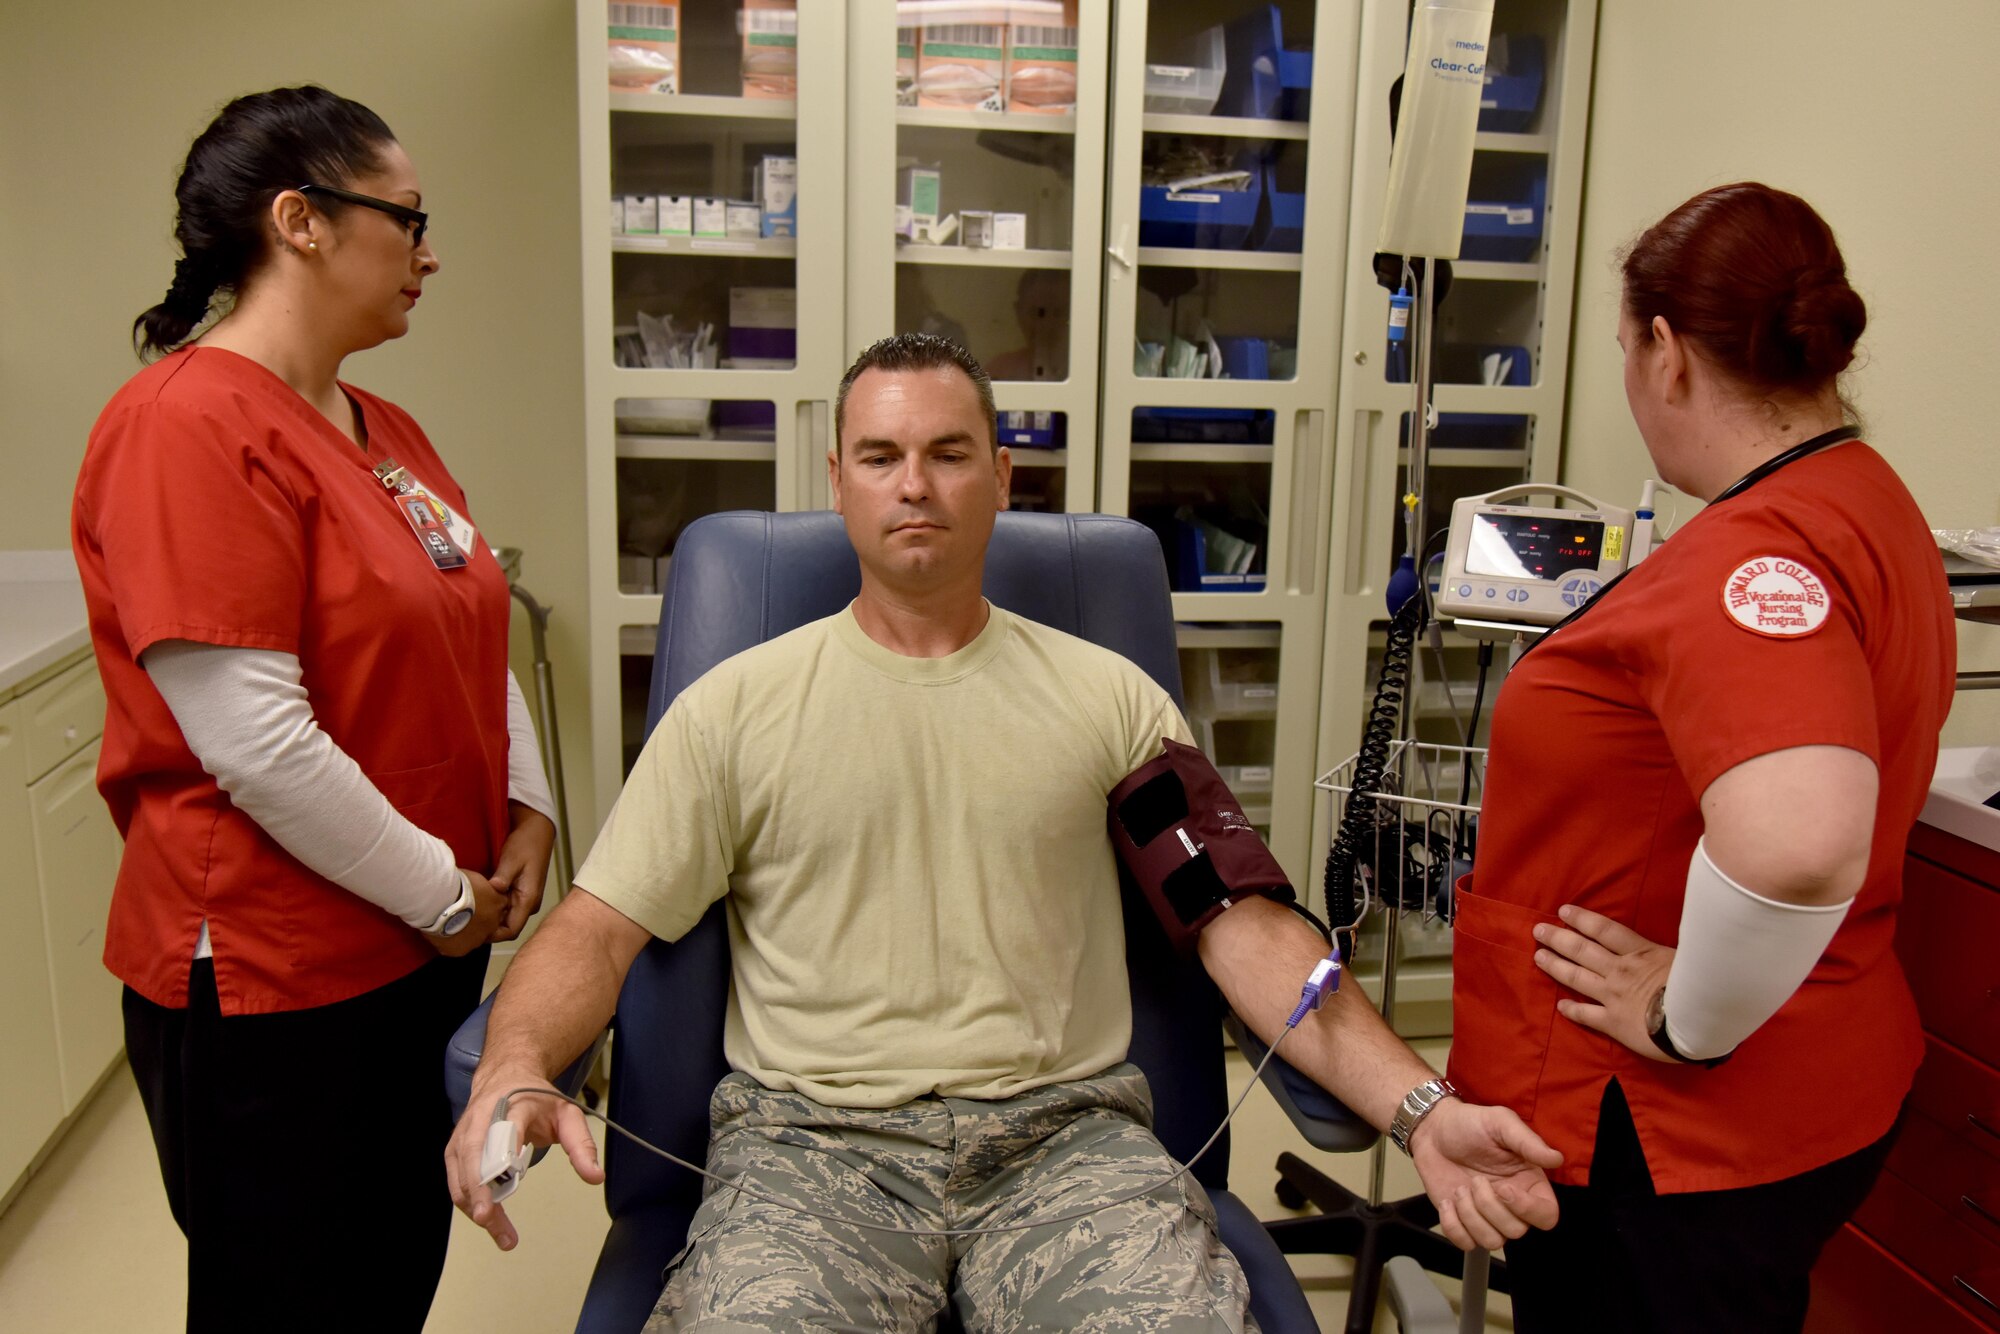 Dee Torres and Barbara Jermyn, Howard College nursing students, practice taking blood pressure and heart rate on Master Sgt. John Gregg, 17th Medical Operations Squadron superintendent, at the Ross Clinic on Goodfellow Air Force Base, Texas, May 2, 2017. Jermyn and Torres came to learn at the clinic as part of two-day clinical rotation partnership with Howard College. (U.S. Air Force photo by Staff Sgt. Joshua Edwards/Released)